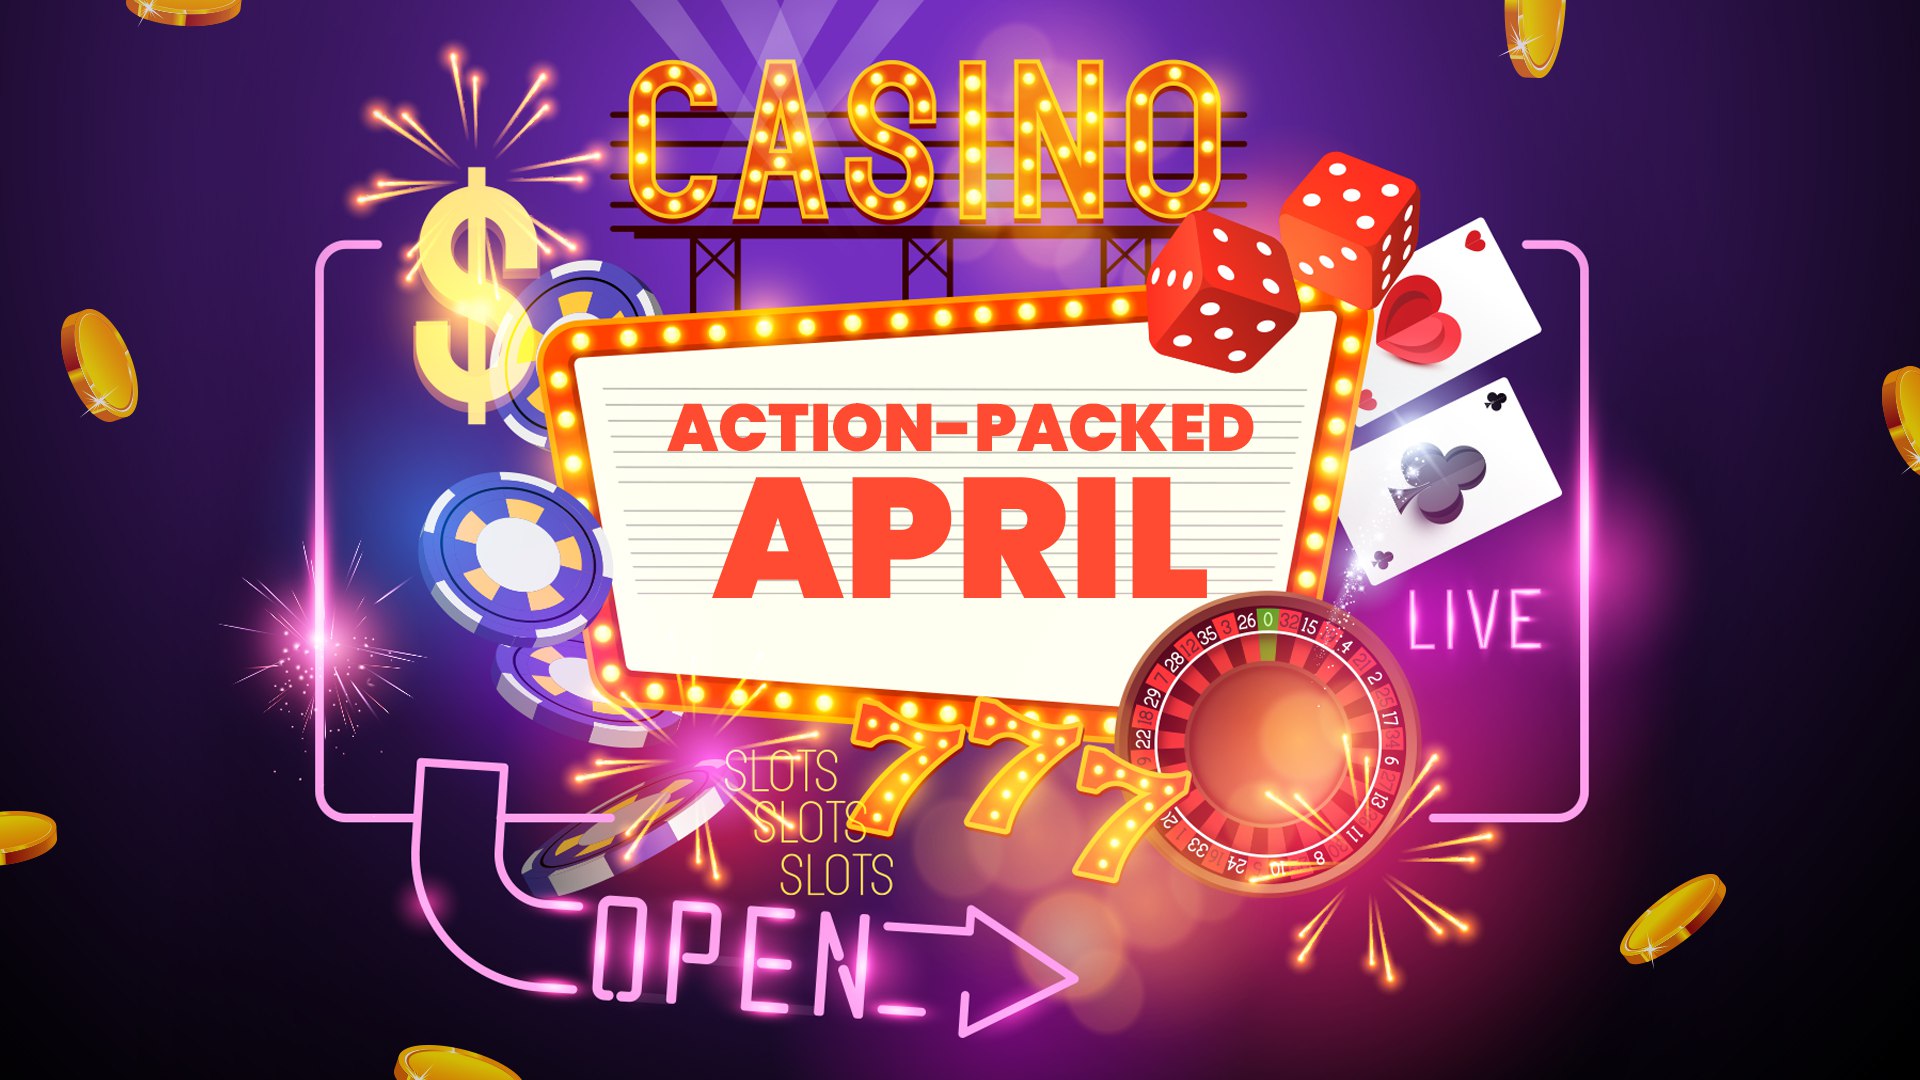 april fools cryptowild promotions